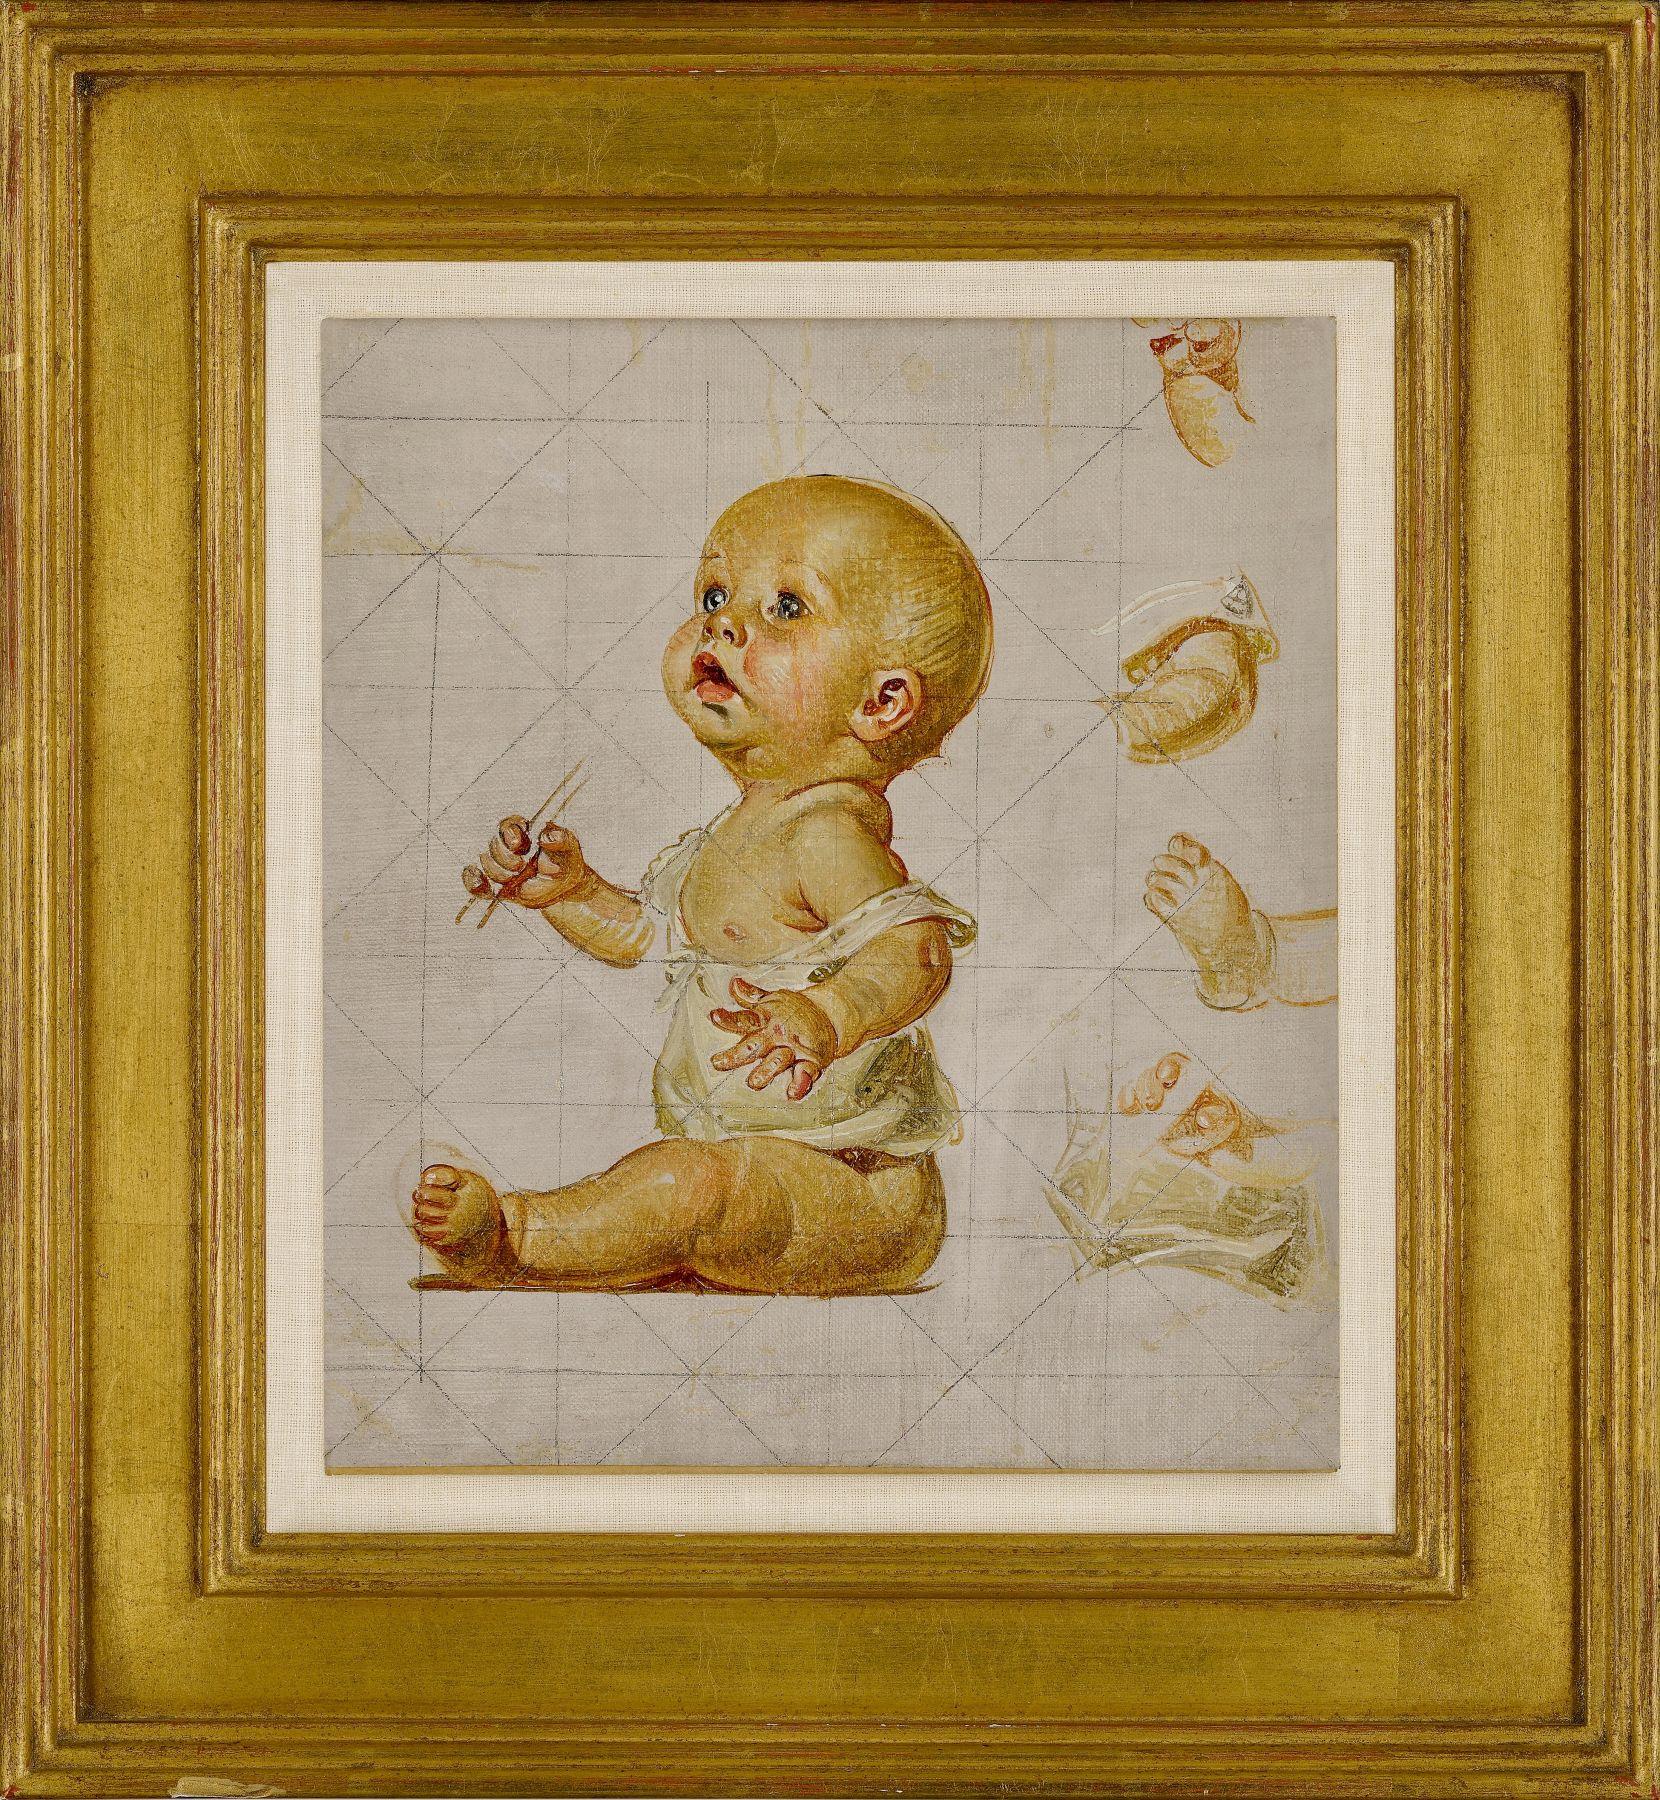 Study for New Year's Baby (Blowing Bubbles) - Painting by Joseph Christian Leyendecker